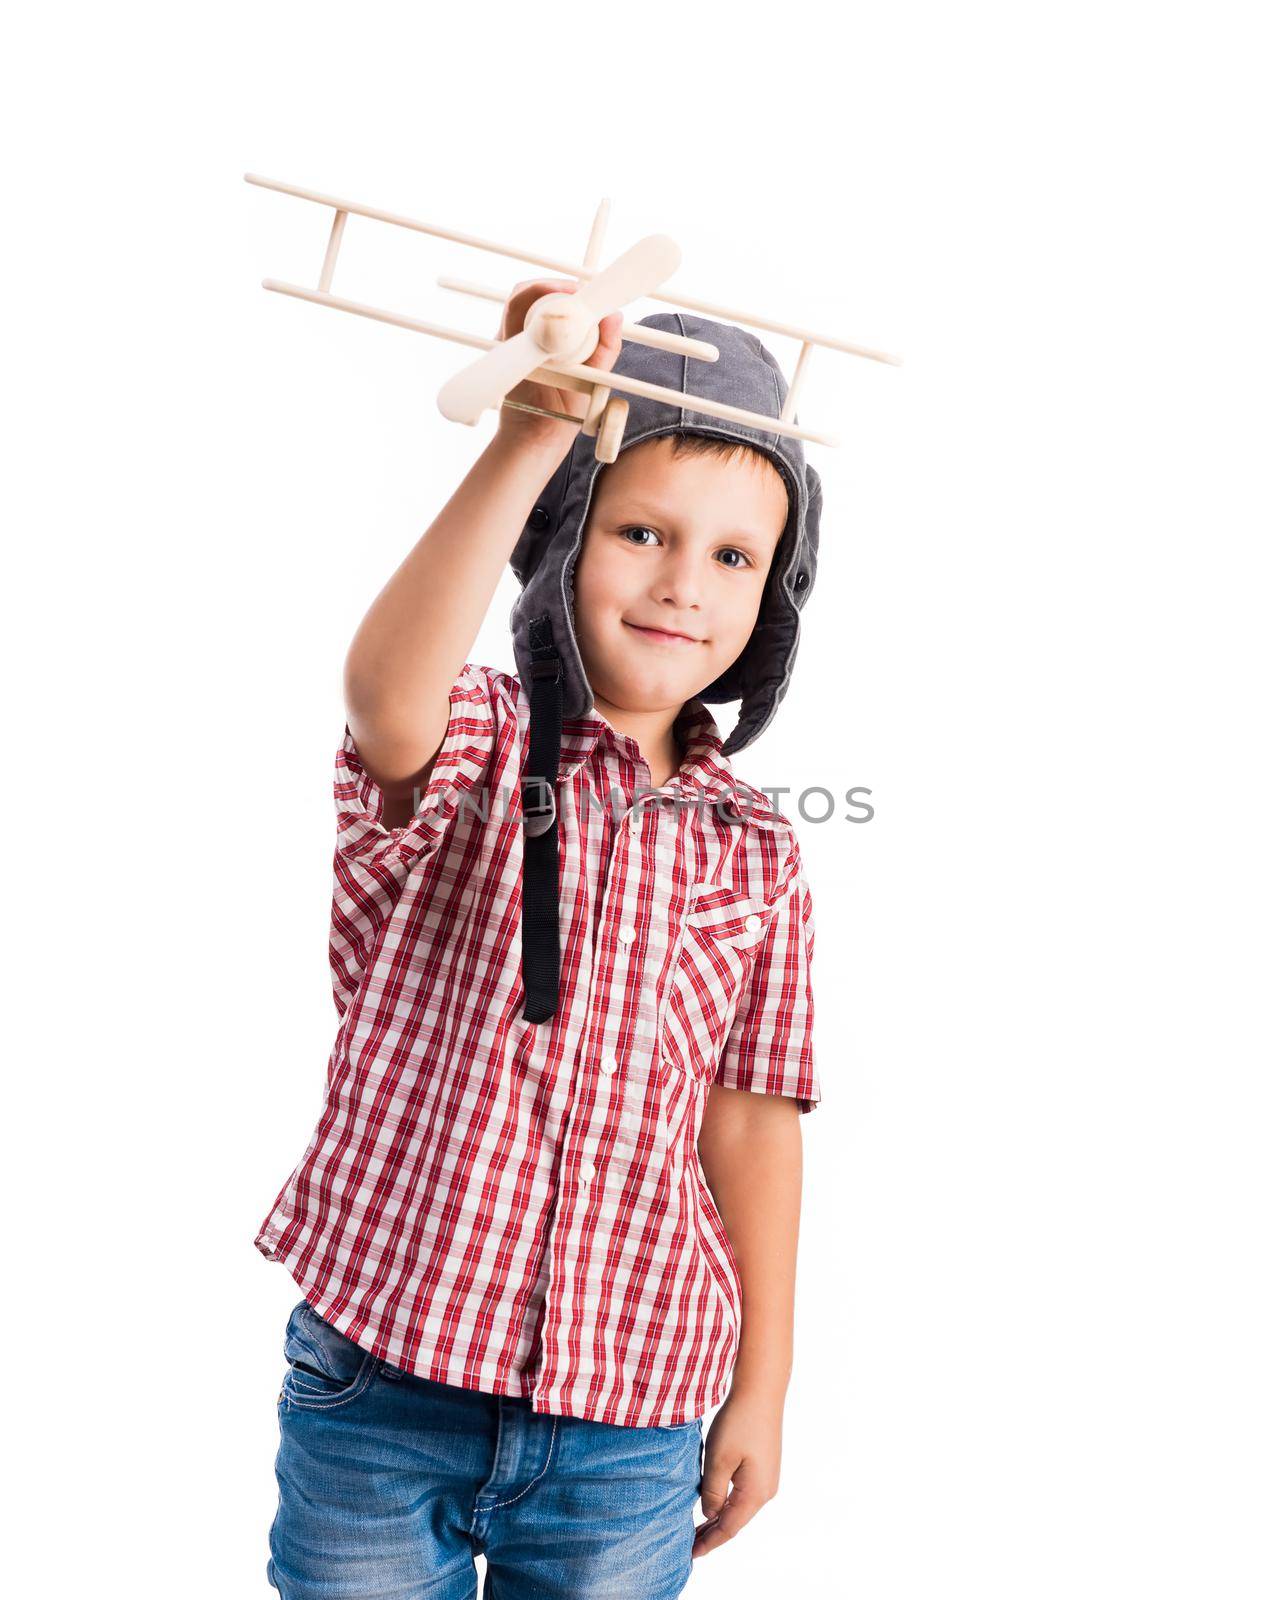 little boy holding wooden toy airplane with pilot hat isolated on white background